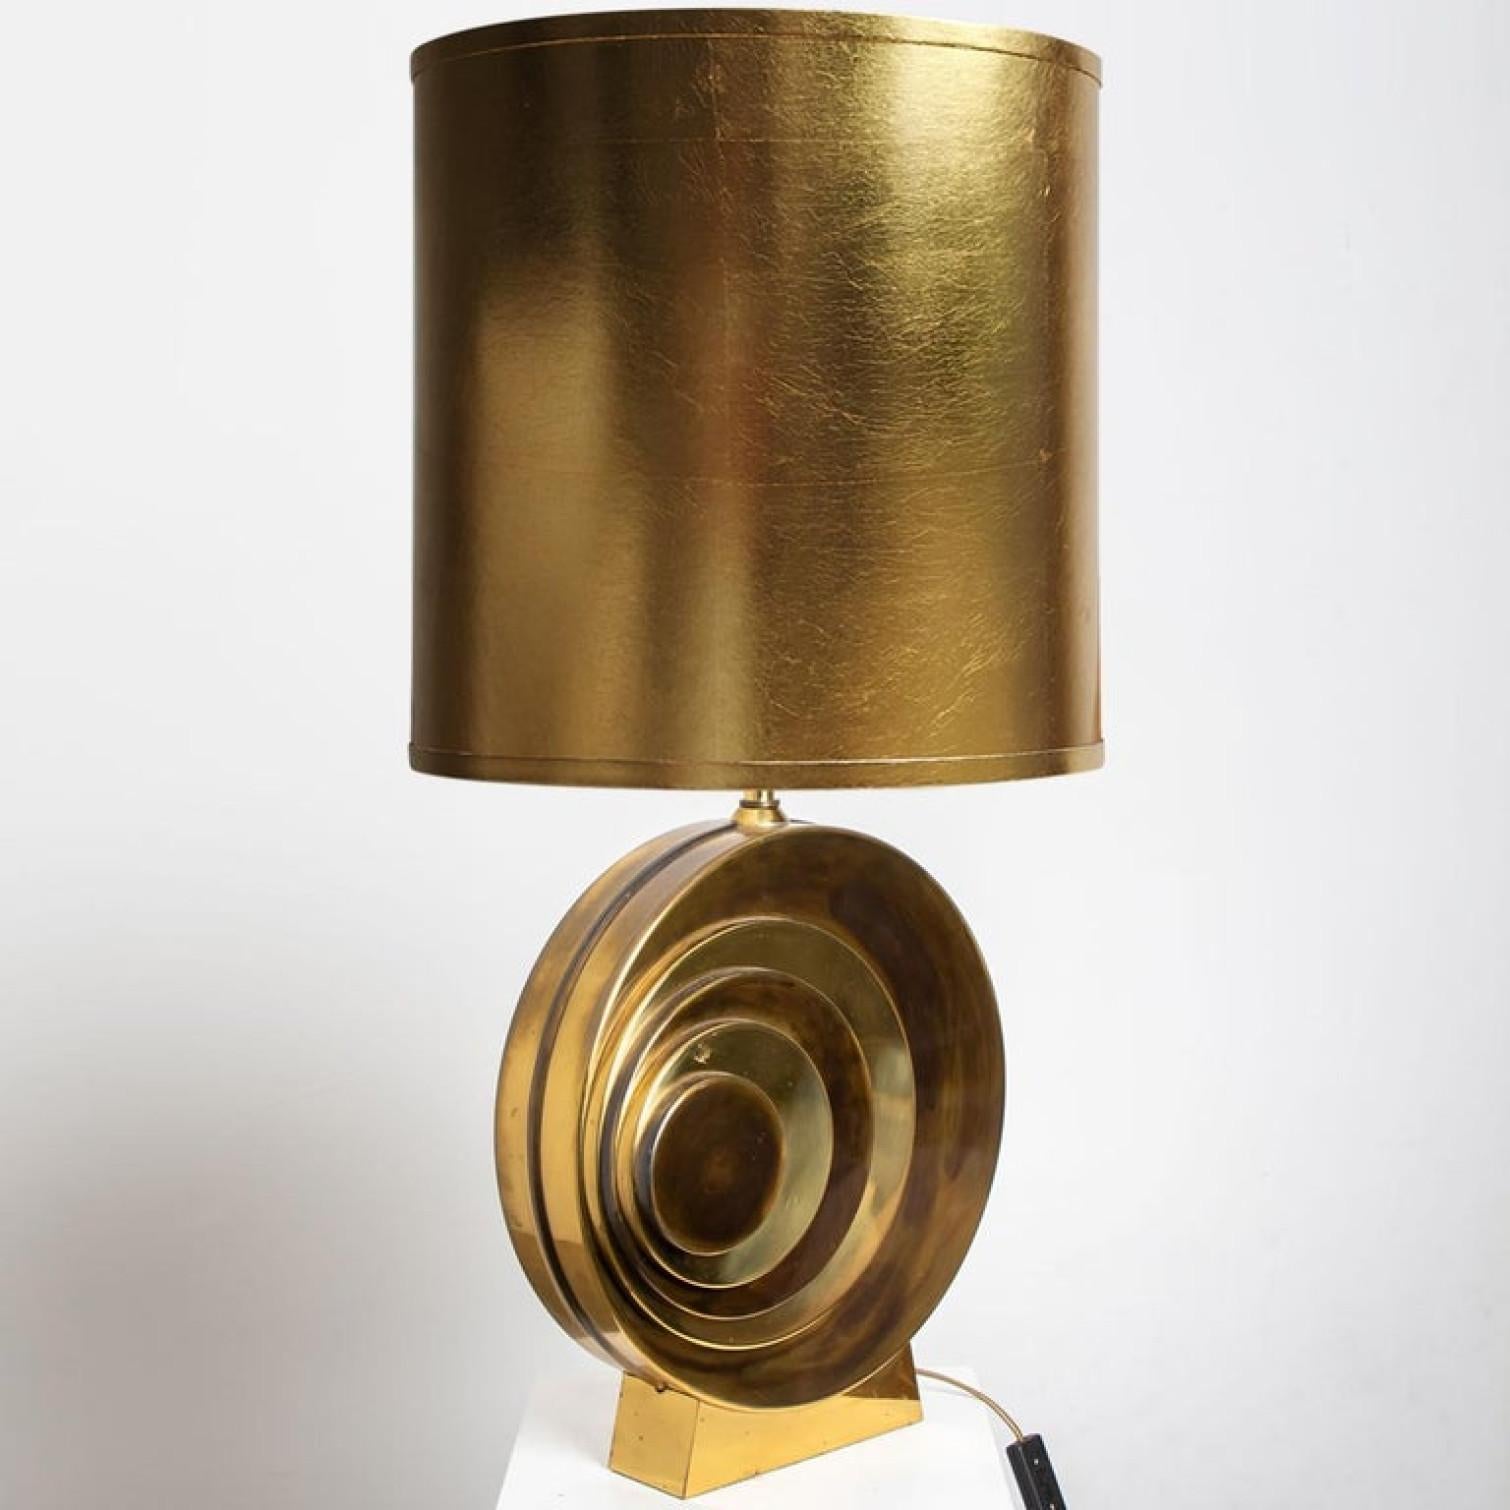 French Design Table Lamp with New Custom Made Lamp Shade by Rene Houben, 1960s For Sale